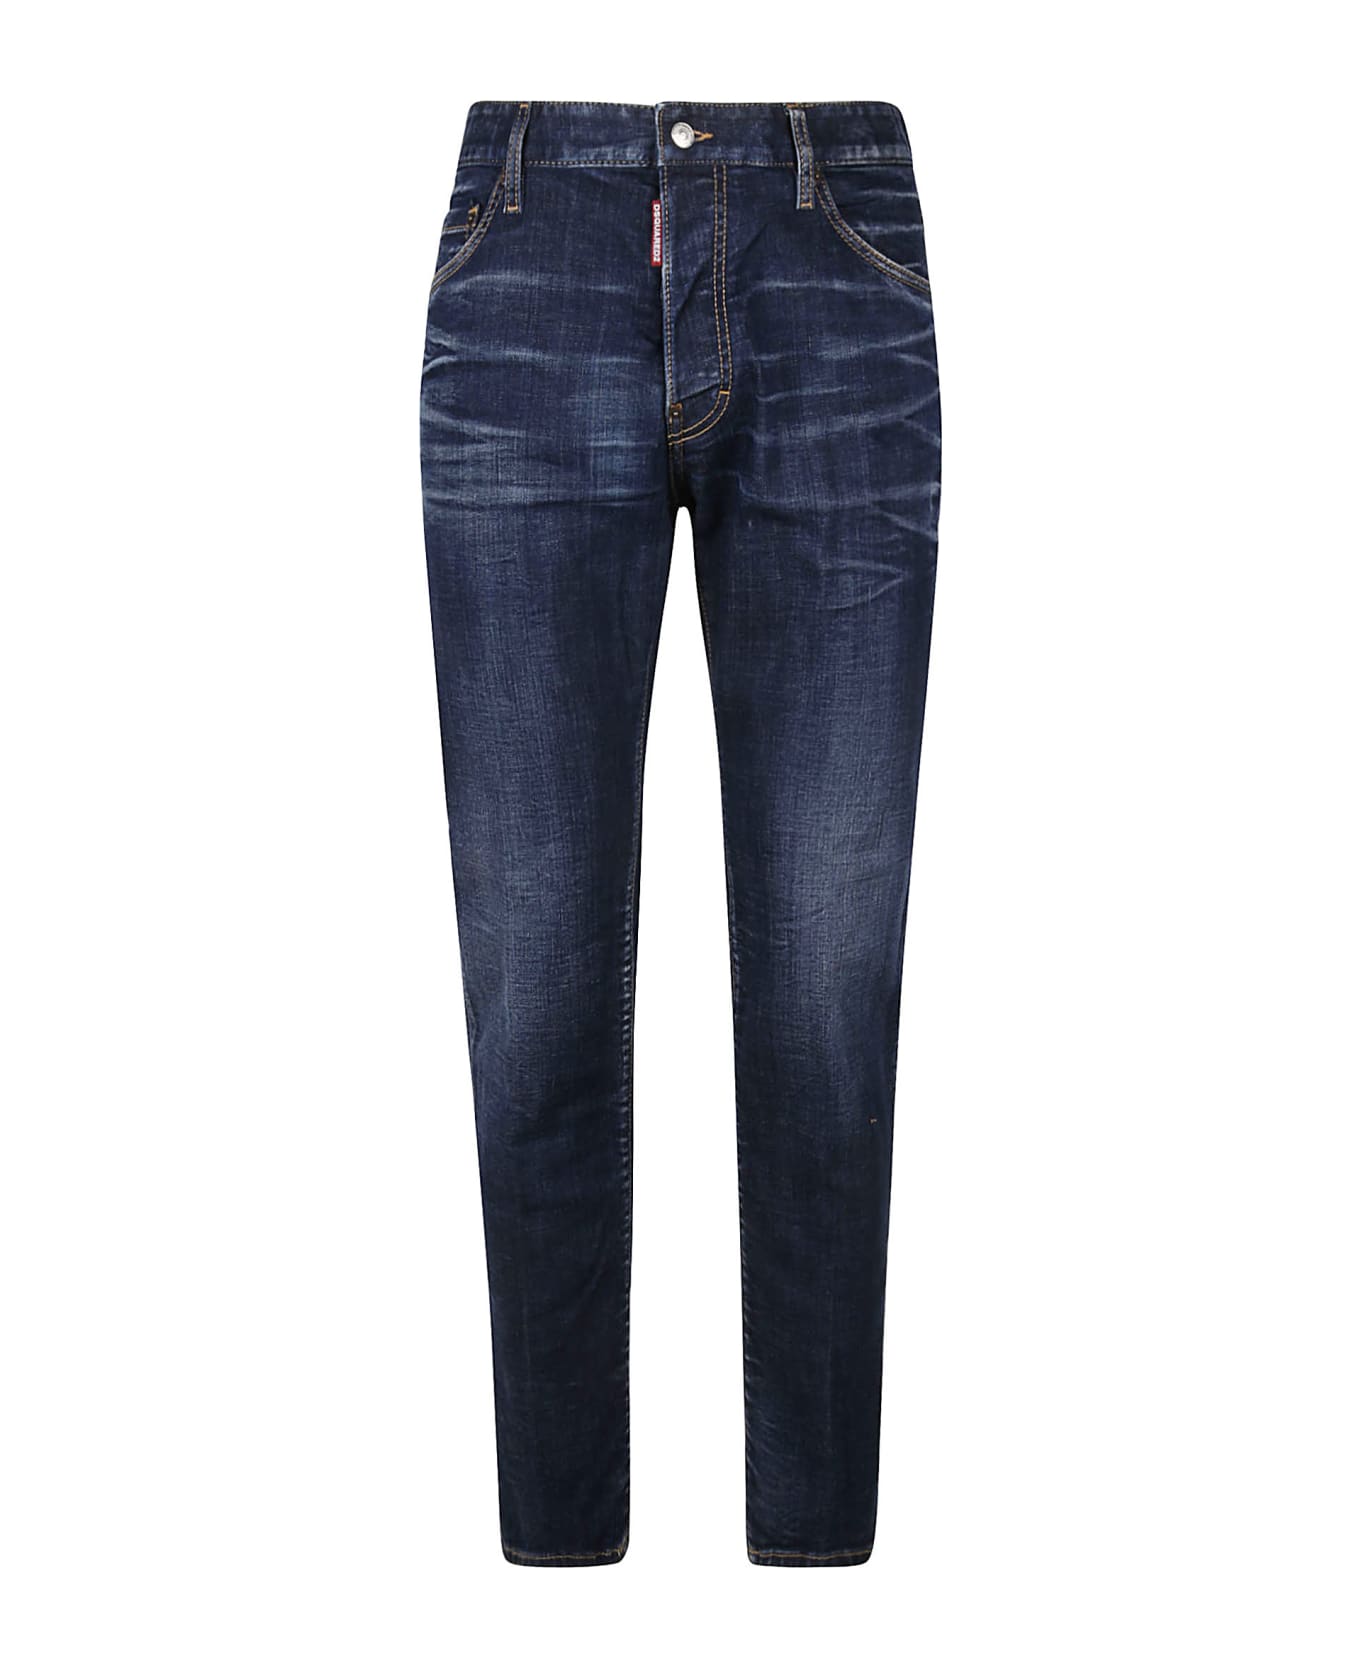 Dsquared2 Cool Guy Jeans - Navy Blue ボトムス